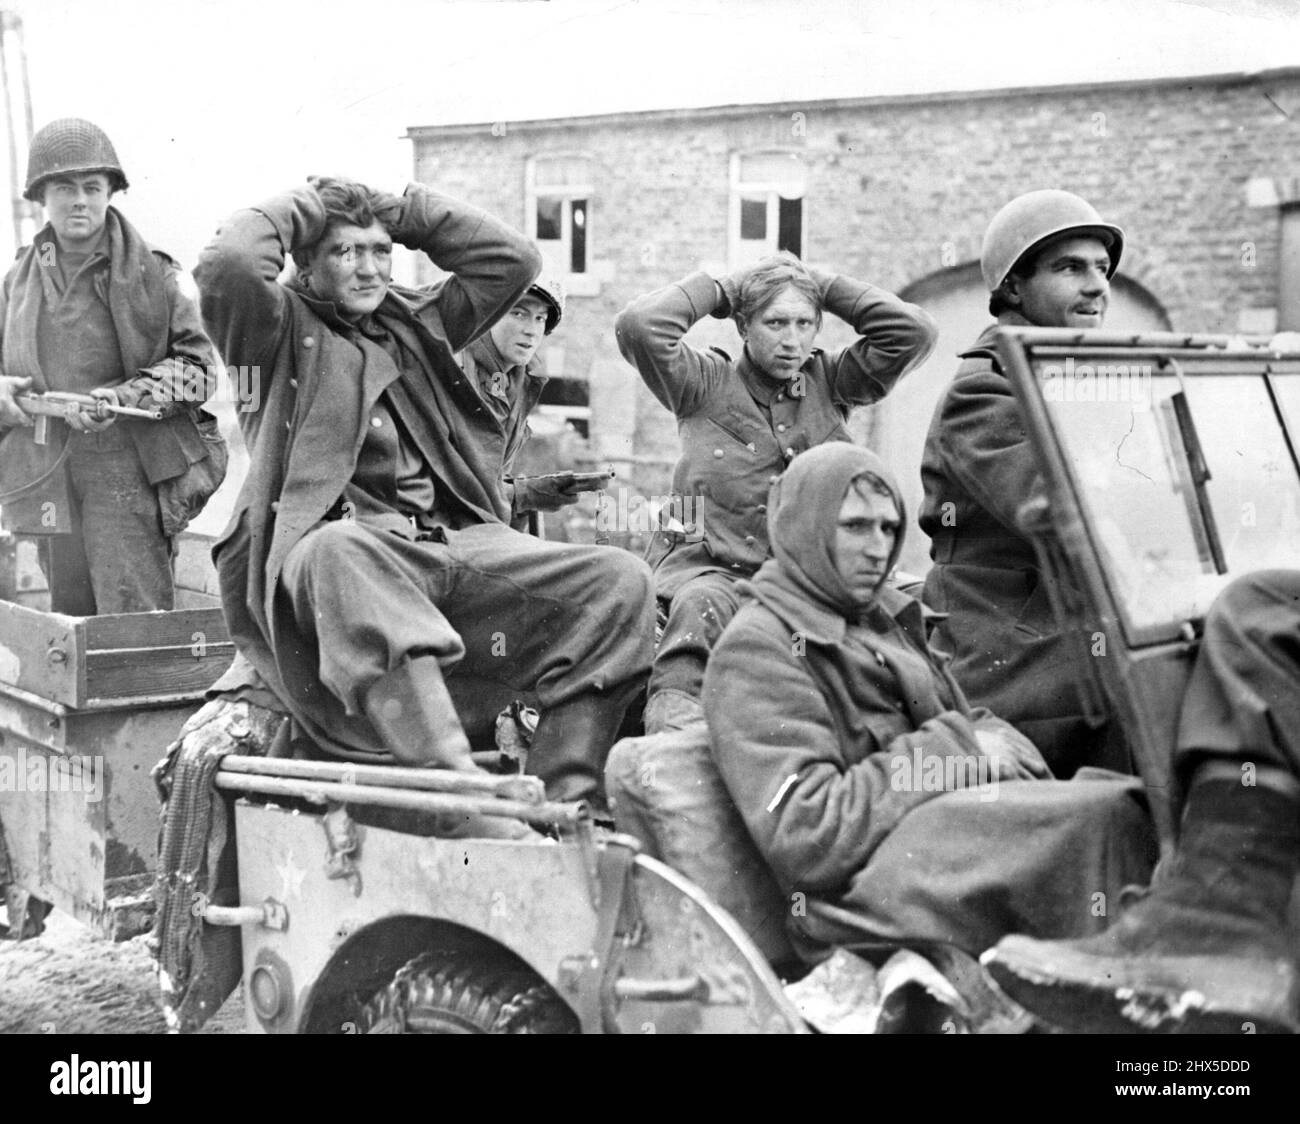 American Soldiers Bring in Nazi Intelligence Patrol U.S. soldiers of the Second Armored Division bring in three Nazis, members of an intelligence patrol, after capturing them on the outskirts of a Belgian town. The two Nazis riding in the roar of the U.S. Army vehicle have their hands on their heads; the prisoner in front has apparently suffered a head injury. Between December 16, 1944, when the enemy launched their counter-offensive on the 'estern Front, and January 3, 1945, it was officially estimated by the Allies that the enemy had suffered 60,000 casualties, including prisoners. At least Stock Photo